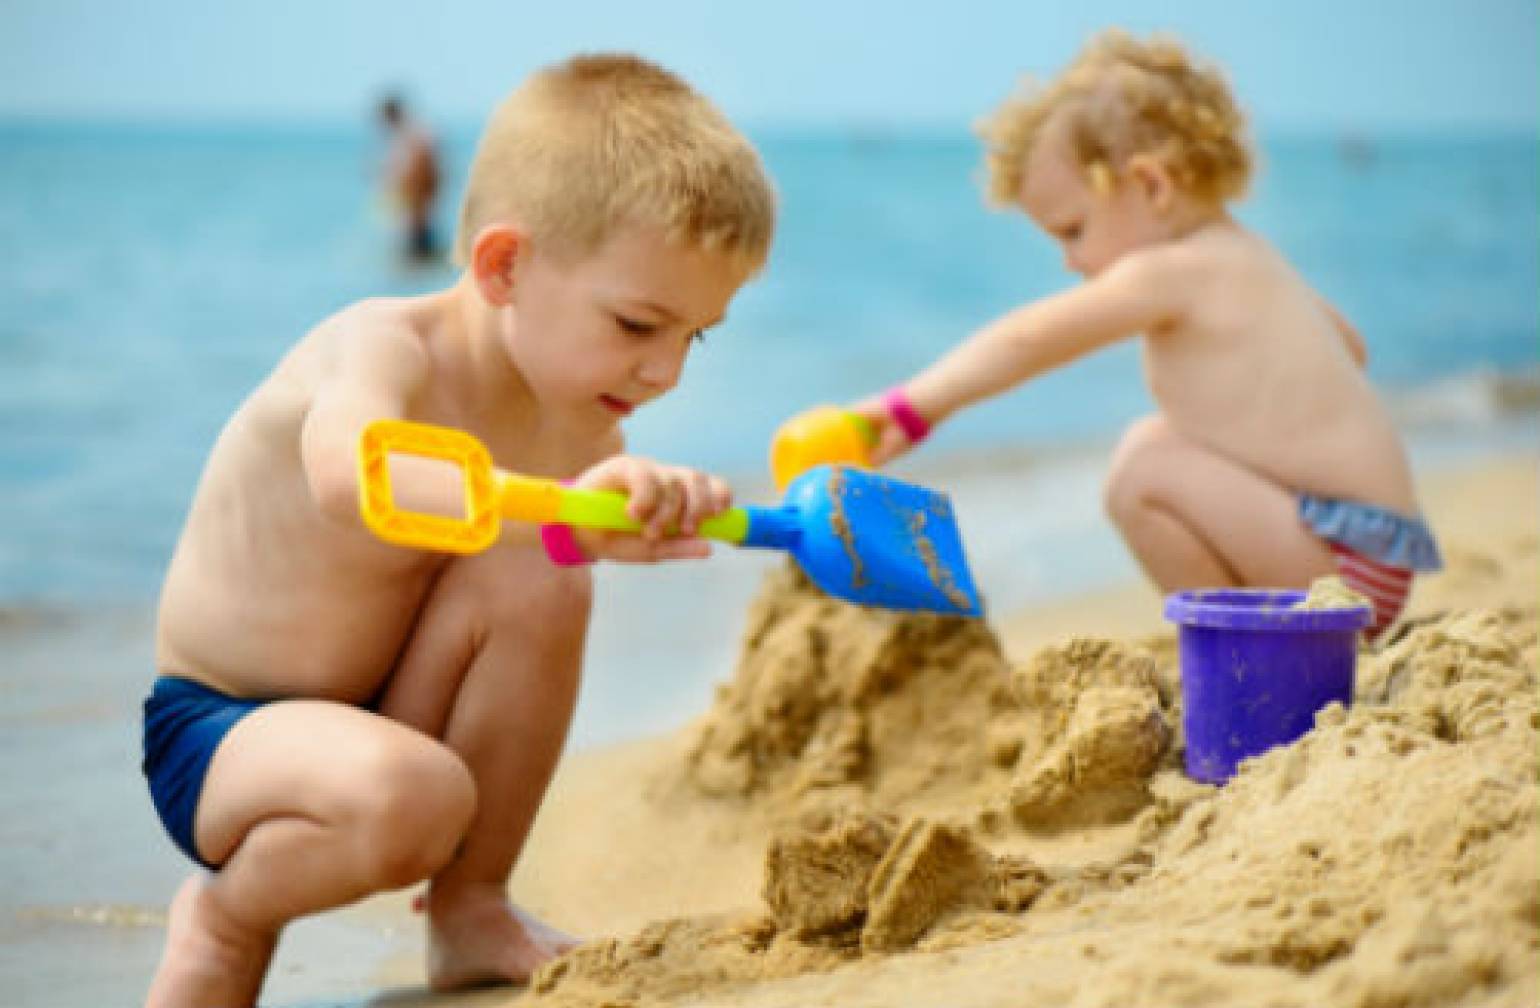 Two little kids playing on the beach